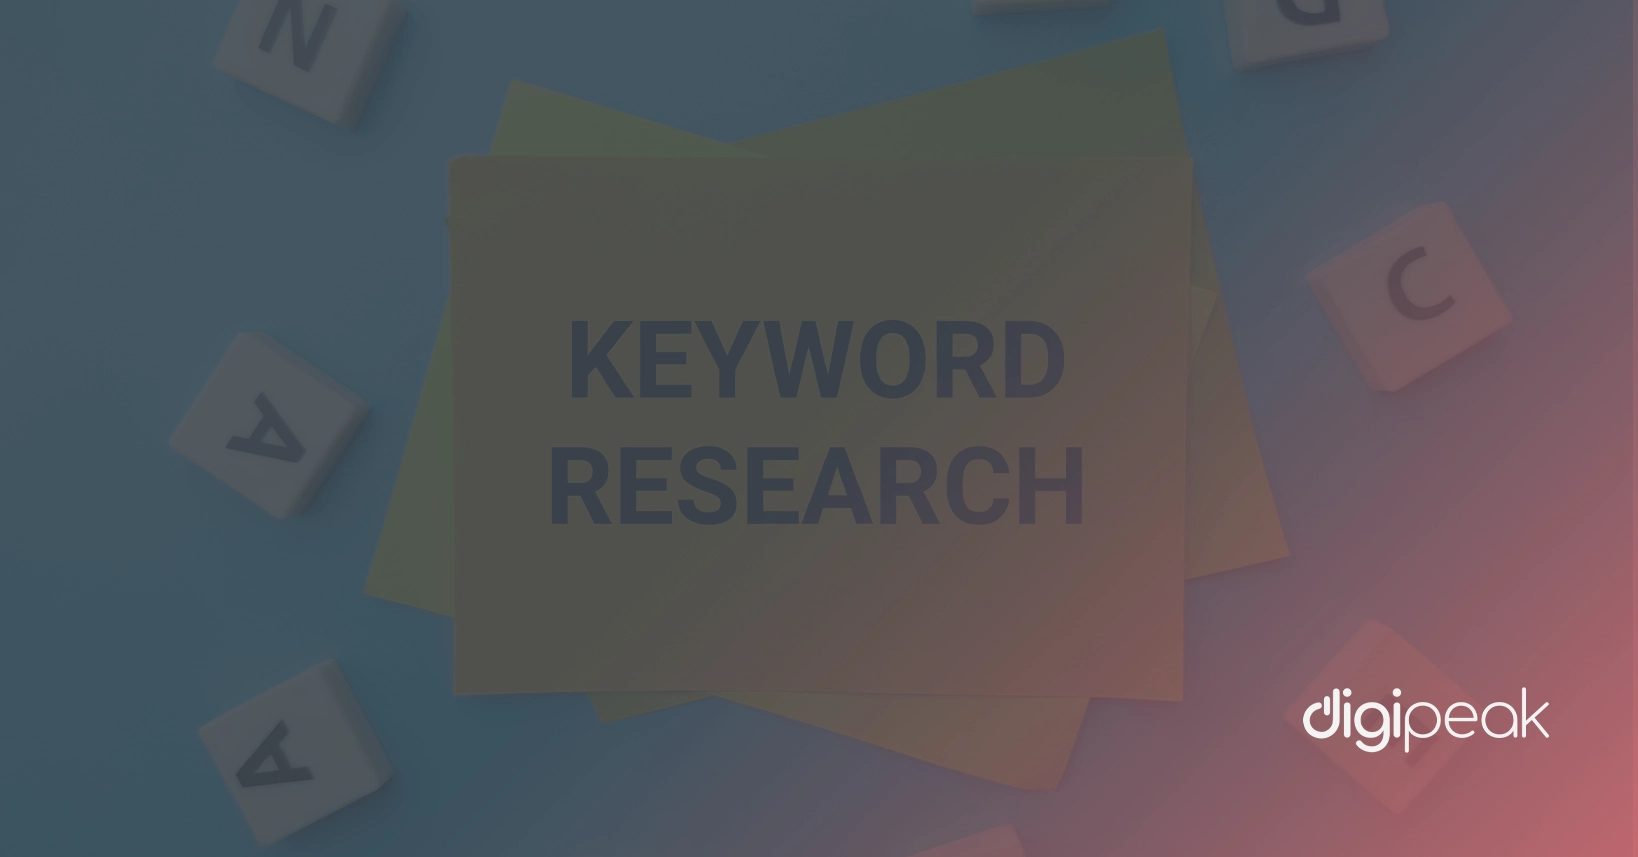 Conducting Keyword Research is Important for Marketing